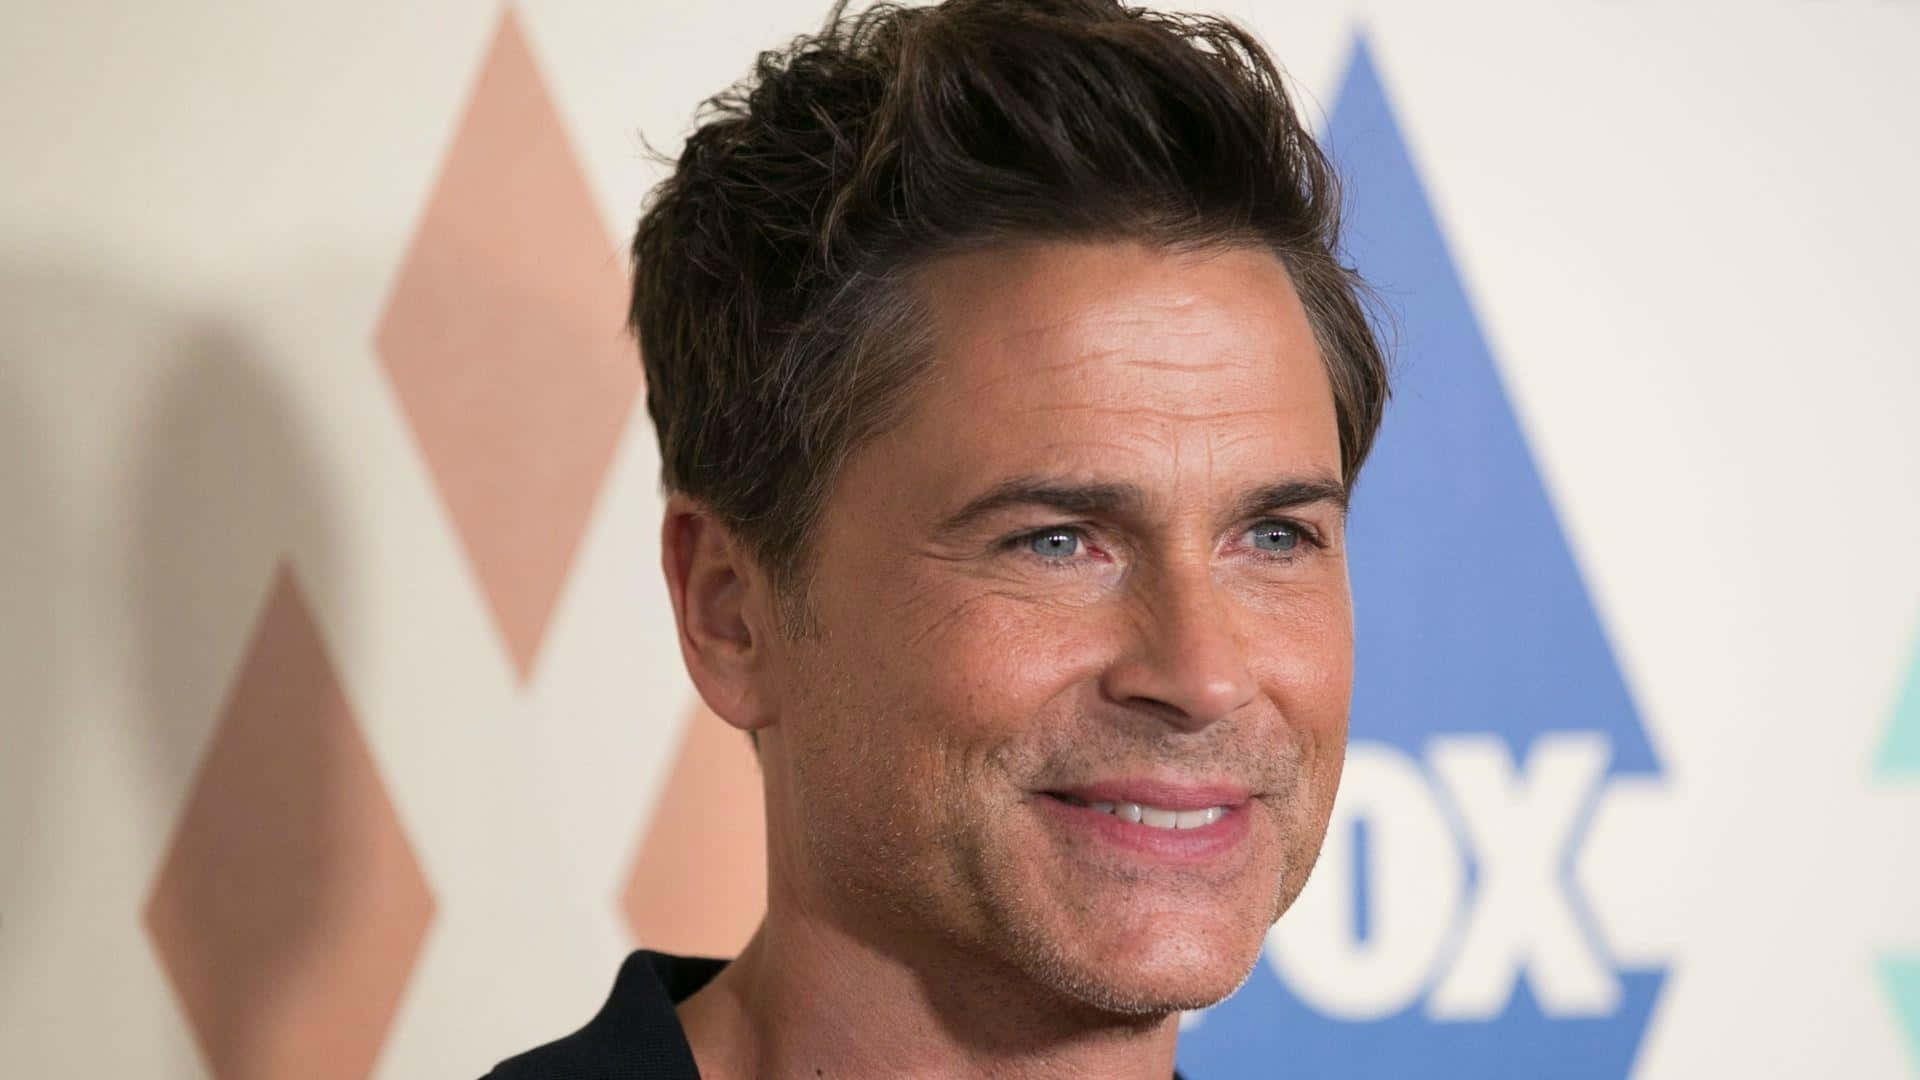 Actor and comedian Rob Lowe, looking suave as ever. Wallpaper